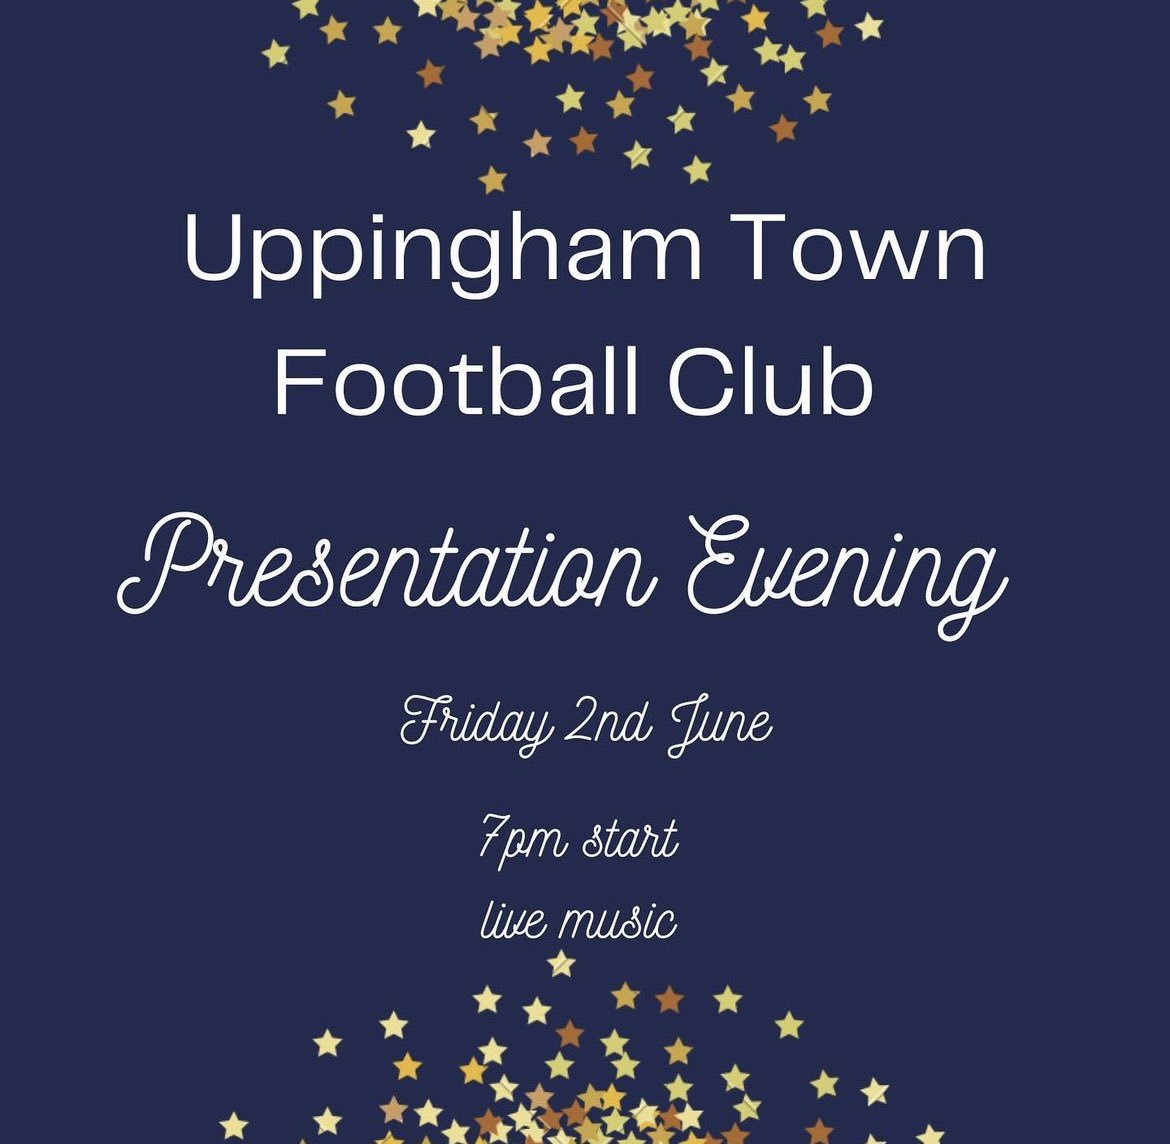 Come and join us to celebrate an amazing season. #utfc 🏆🏆